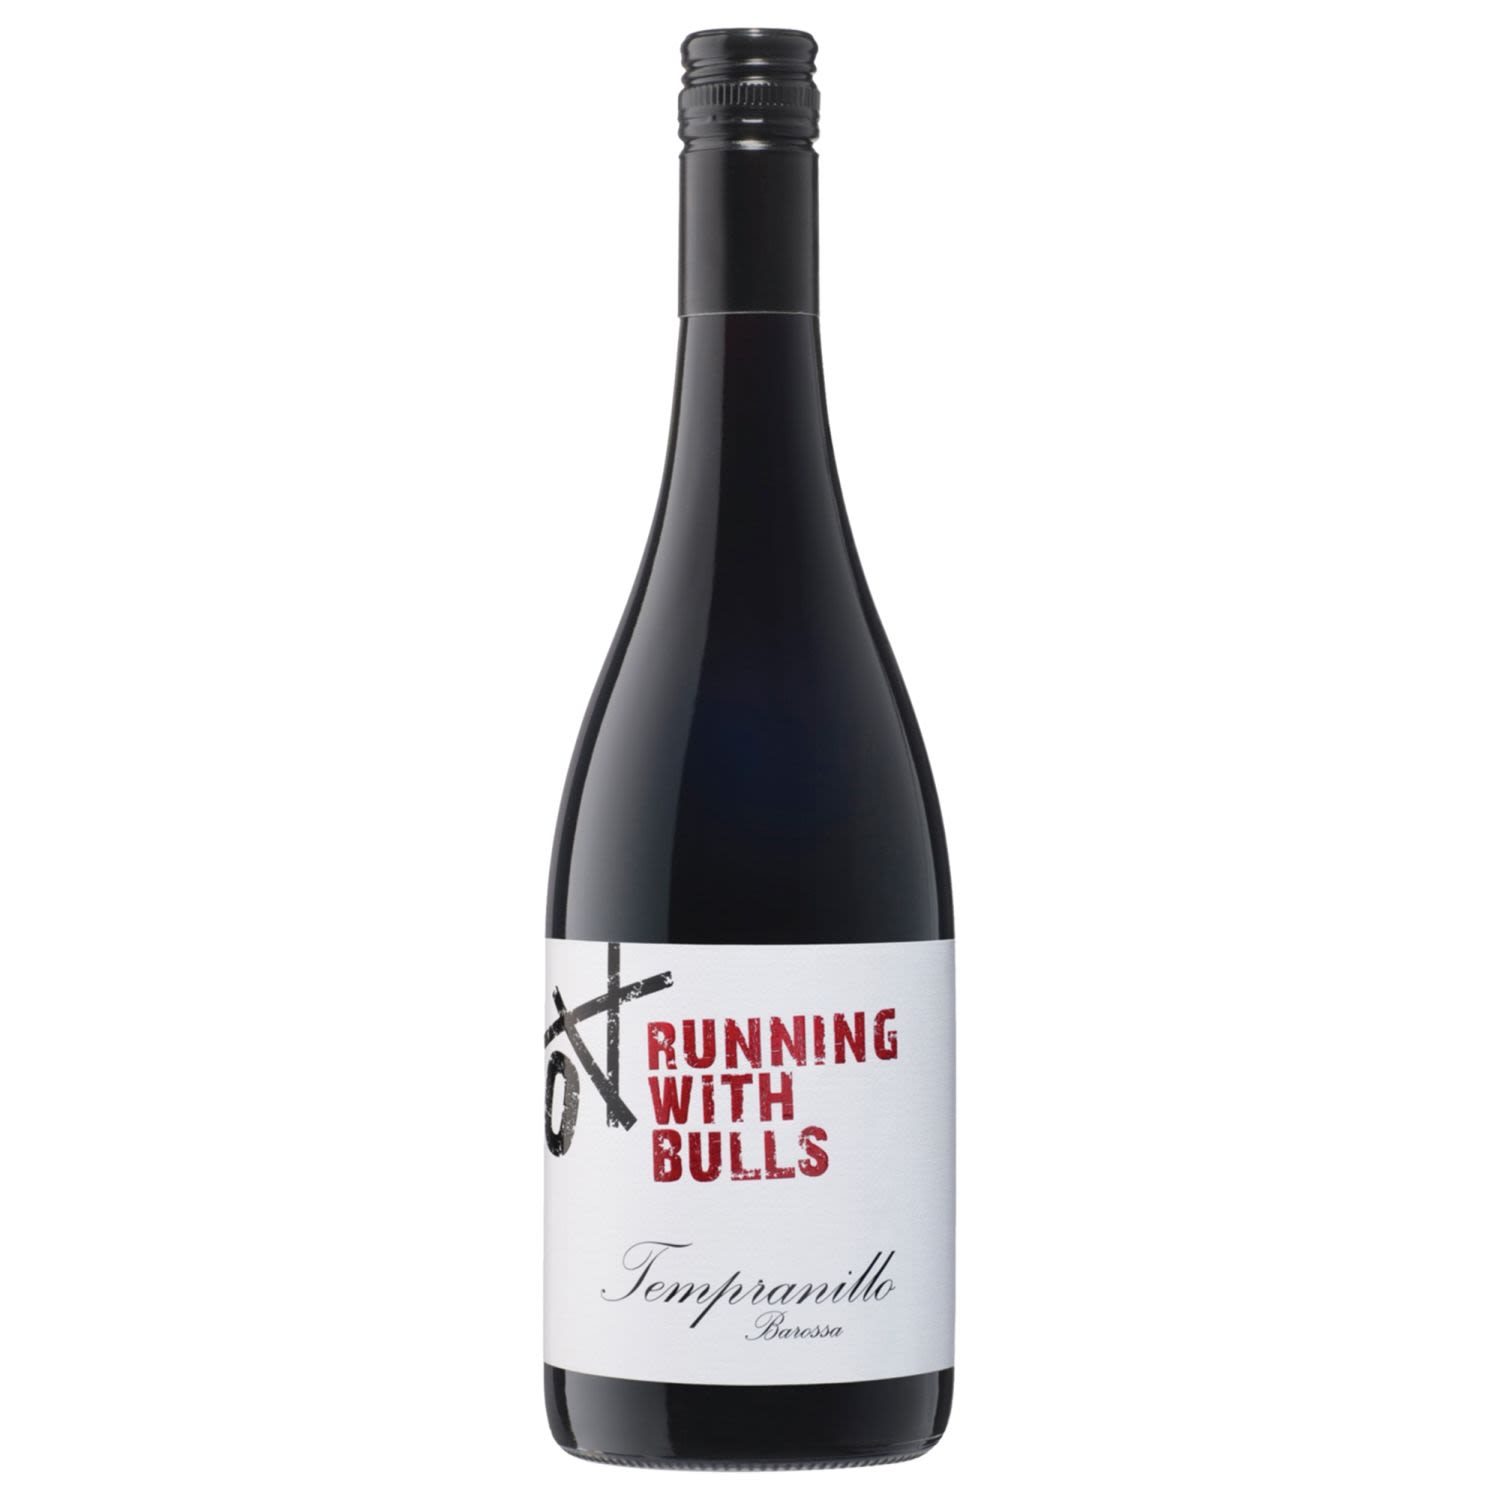 Running with Bulls Barossa Tempranillo is scarlet red in colour. Aromas of cola, crushed herbs and black cherry with hints of clove and tomato leaf. A silky and savoury palate, showing black cherry and pomegranate with fine liquorice like tannins. Enjoy with five spice duck and shiitake pies or gnocchi with rocket pesto, white beans and sun-dried tomatoes.<br /> <br />Alcohol Volume: 13.50%<br /><br />Pack Format: Bottle<br /><br />Standard Drinks: 8</br /><br />Pack Type: Bottle<br /><br />Country of Origin: Australia<br /><br />Region: Barossa Valley<br /><br />Vintage: Vintages Vary<br />